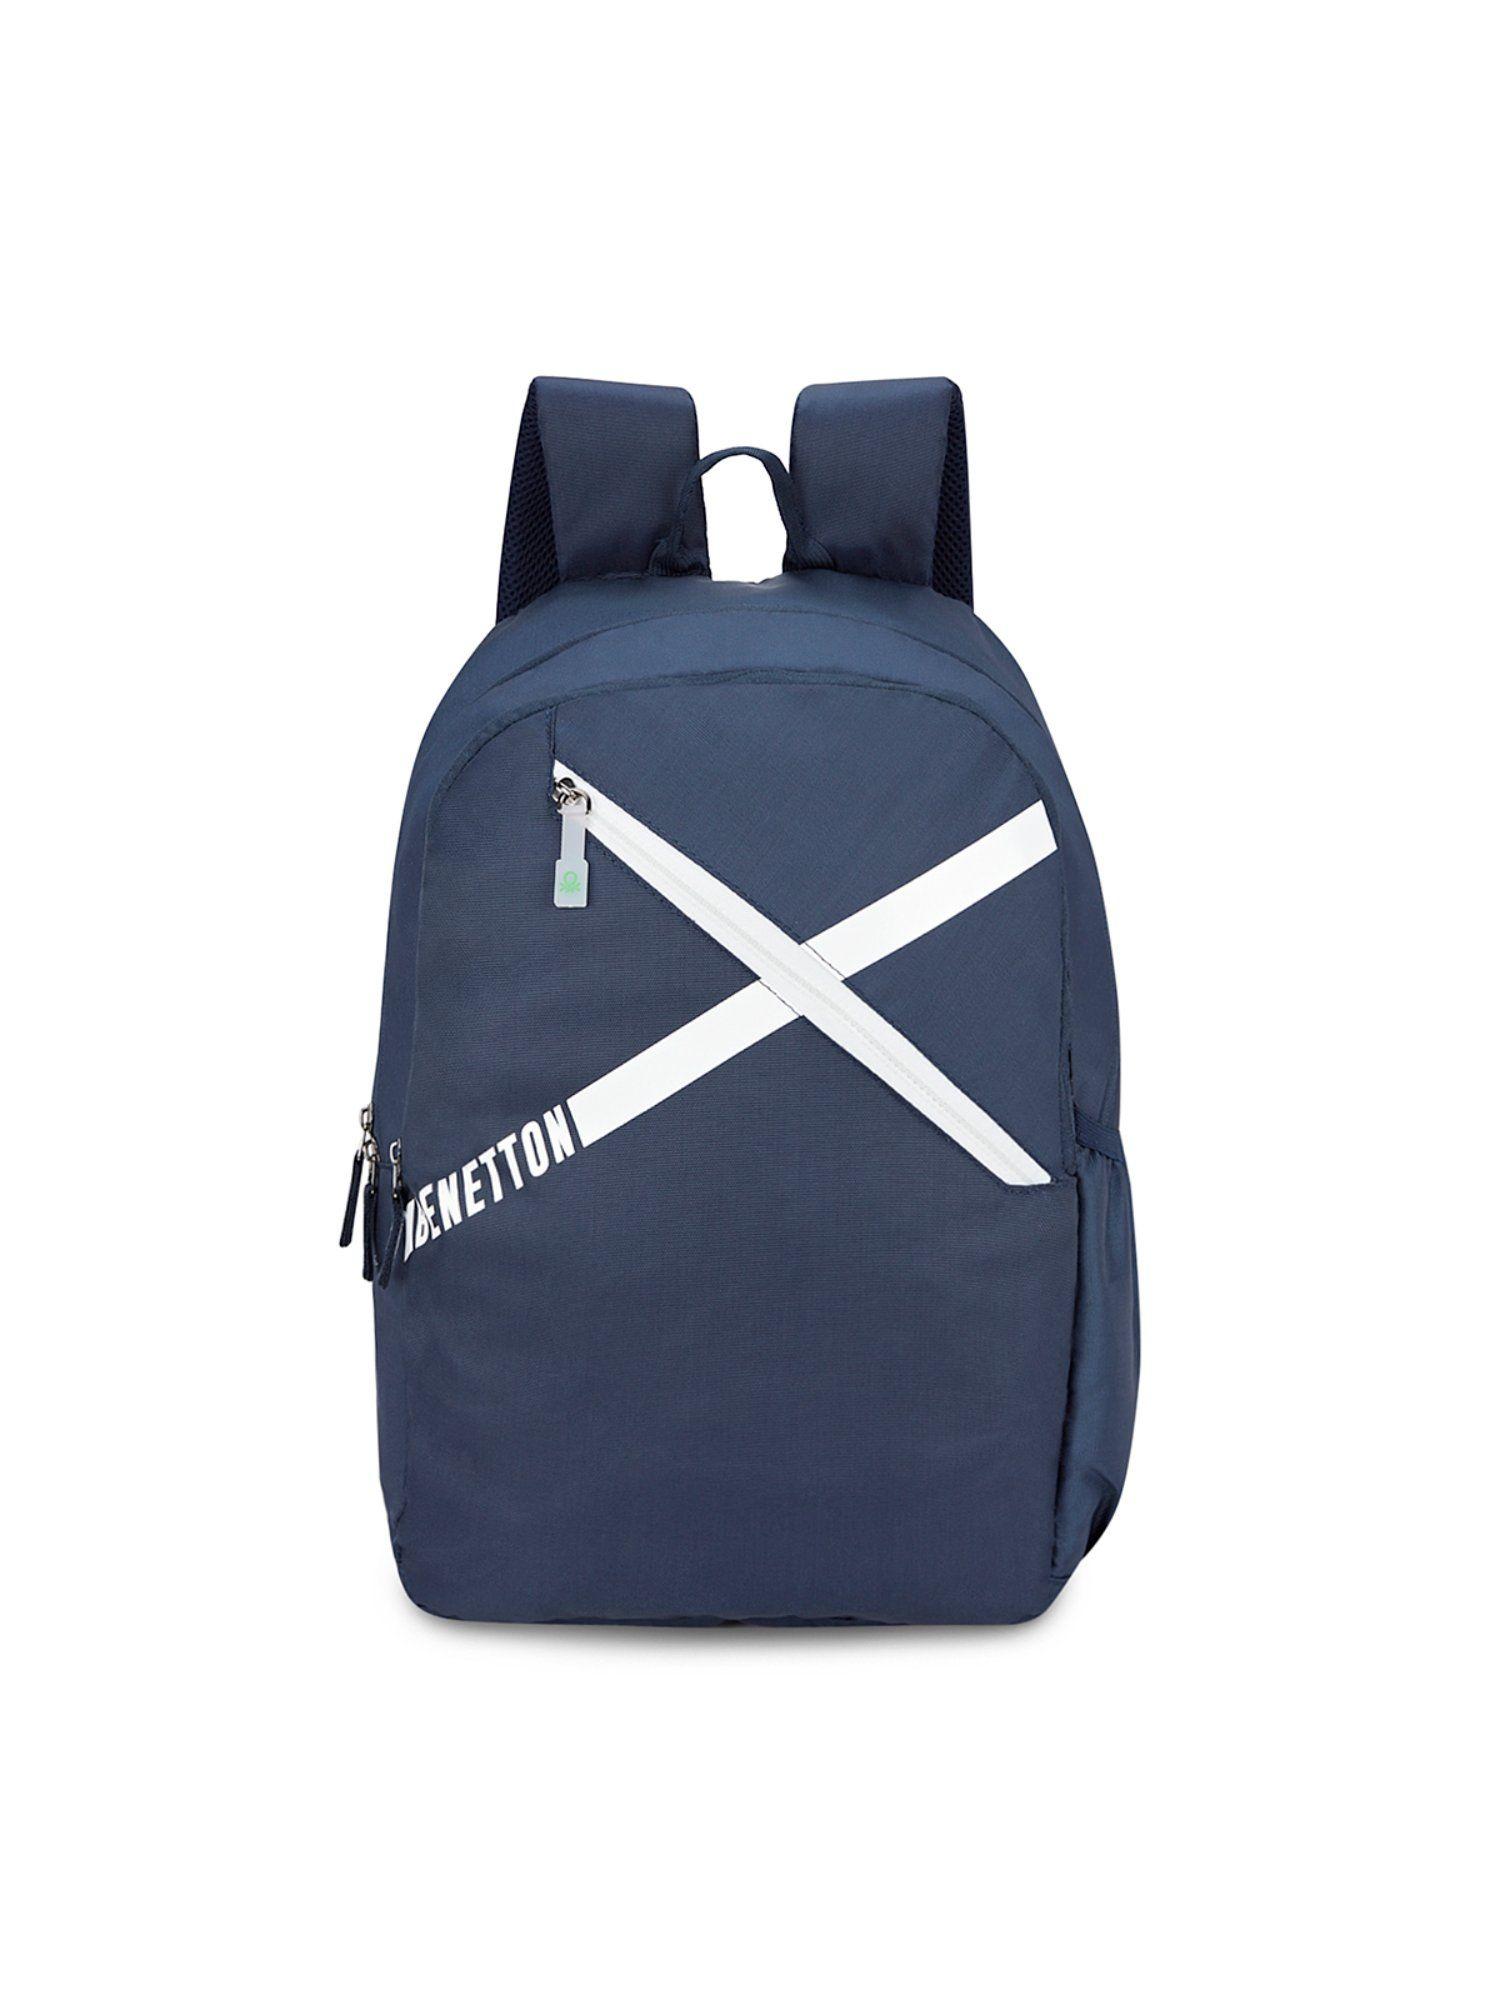 darnell unisex polyester backpack - navy (m)